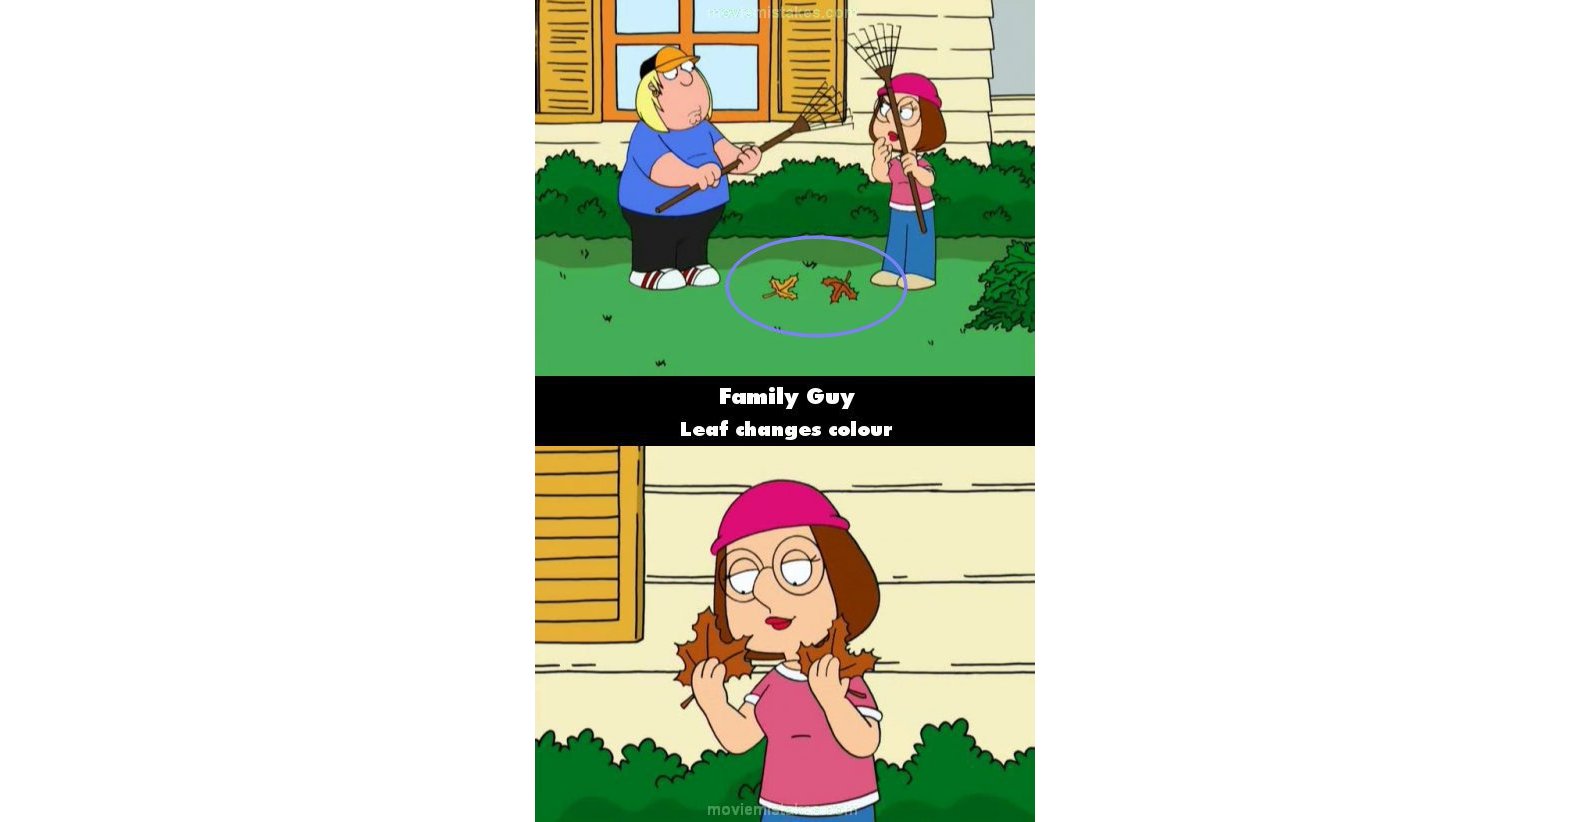 Family Guy (1999) TV mistake picture (ID 65719)